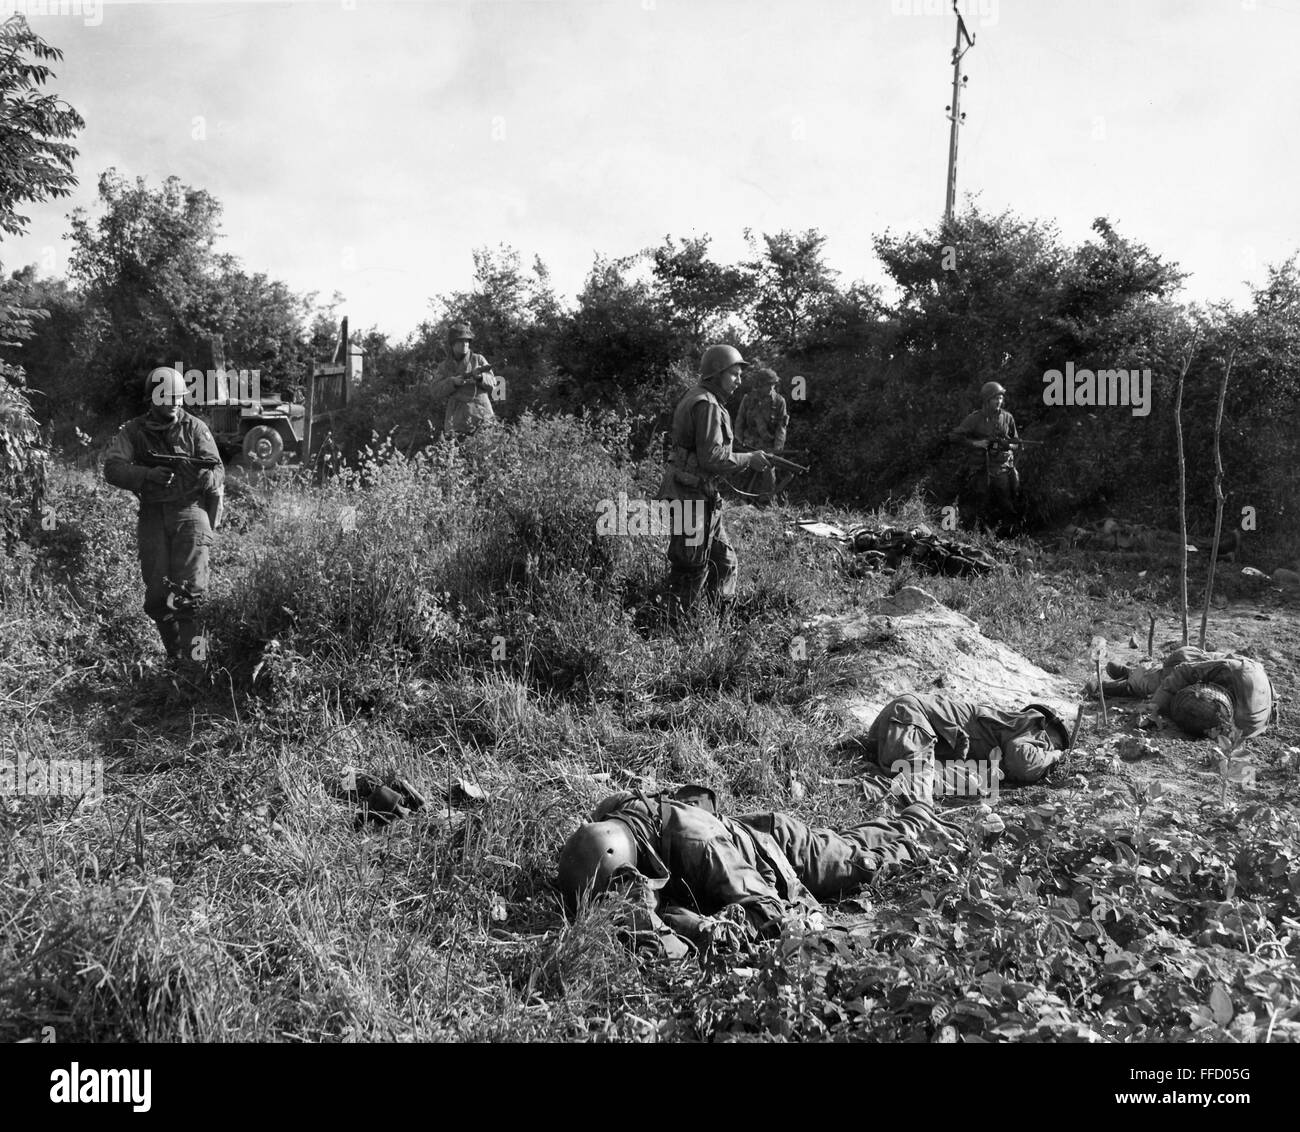 WORLD WAR II: FRANCE, 1944. /nAmerican paratroopers move through a field in Carentan, France, passing members of their own unit killed by German snipers. Photographed 14 June 1944. Stock Photo